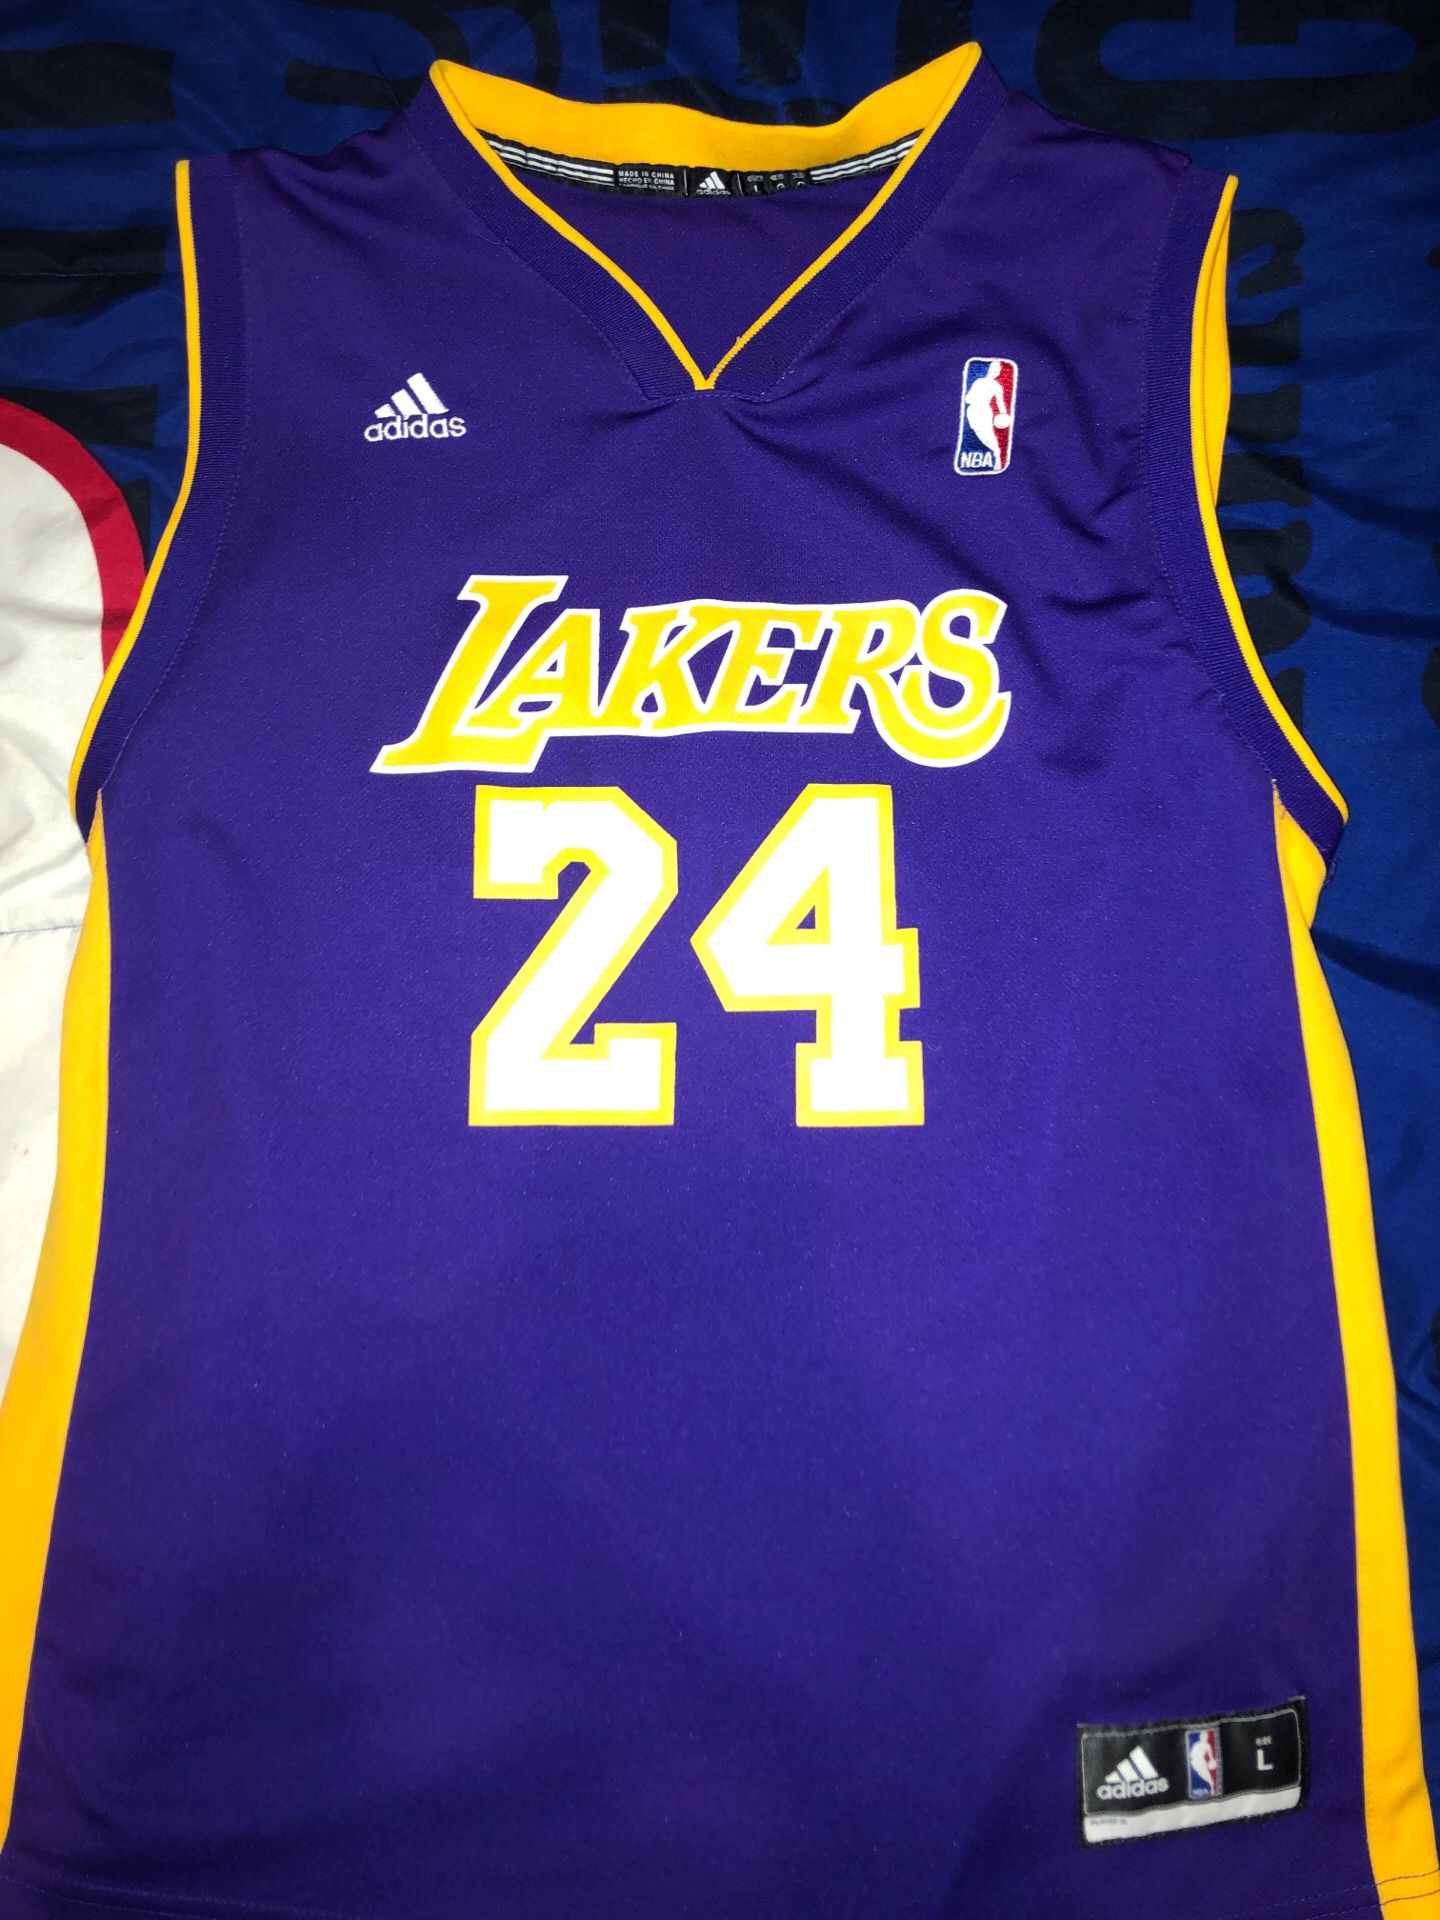 NBA Los Angeles Lakers Kobe Bryant Jersey for Sale in Irwindale, CA -  OfferUp